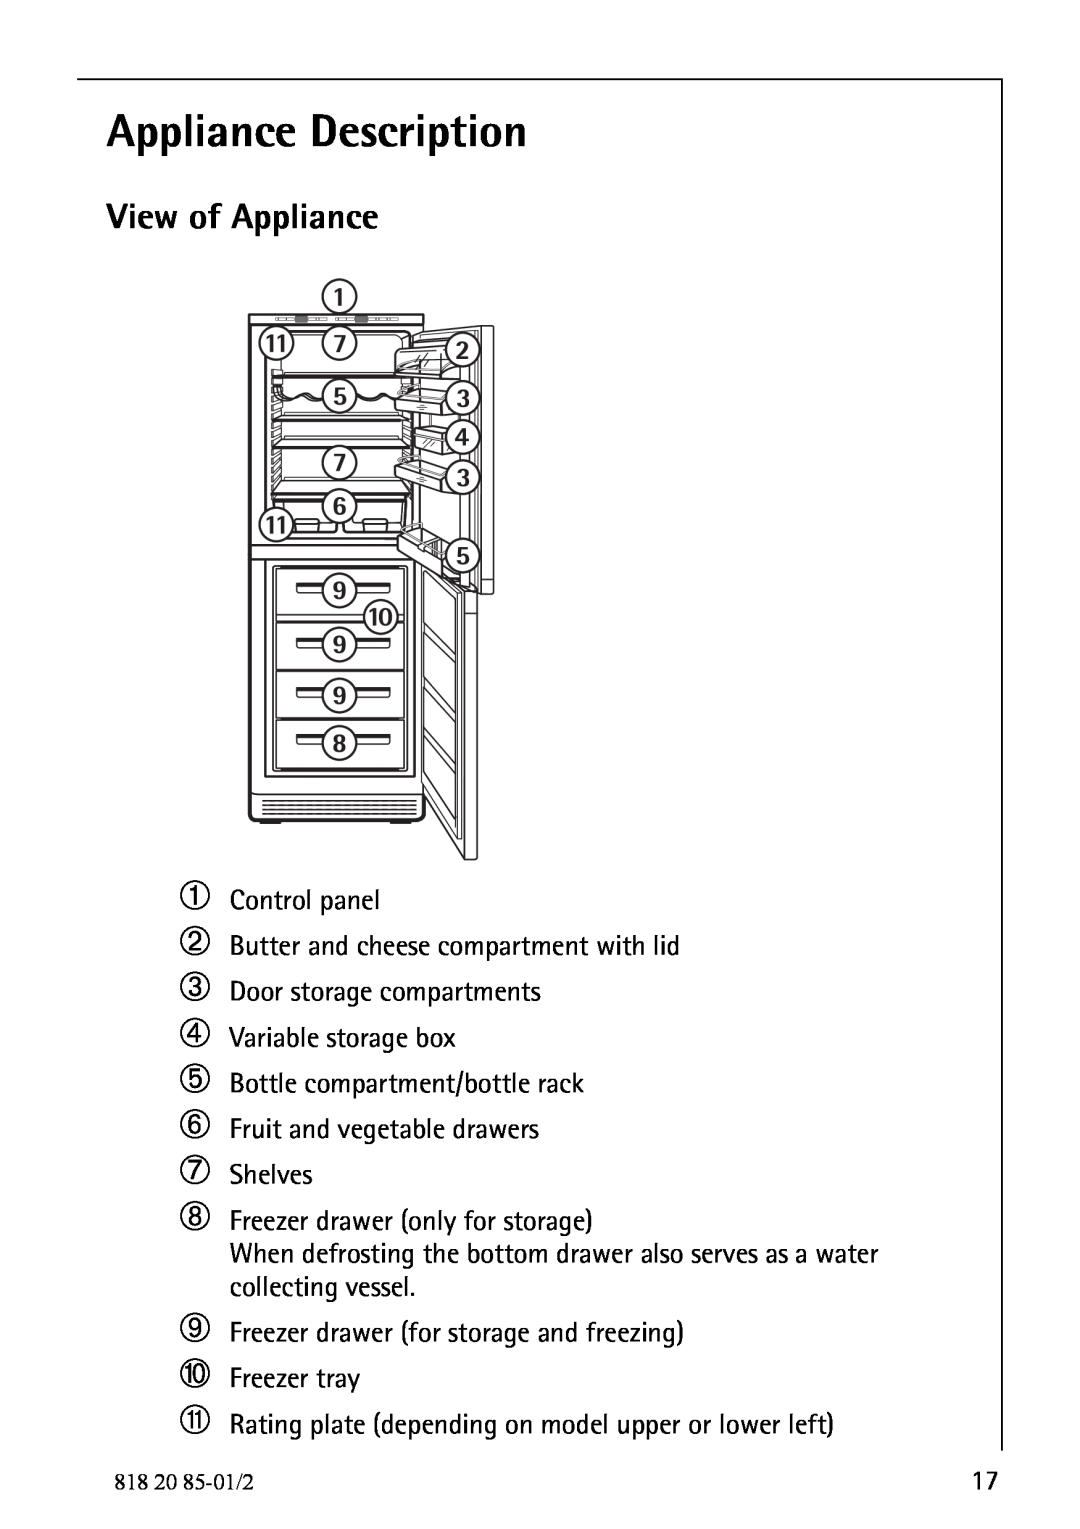 Electrolux 818 20 85 operating instructions Appliance Description, View of Appliance, ➀ ➁ ➂ ➃ ➄ ➅ ➆ ➇ 